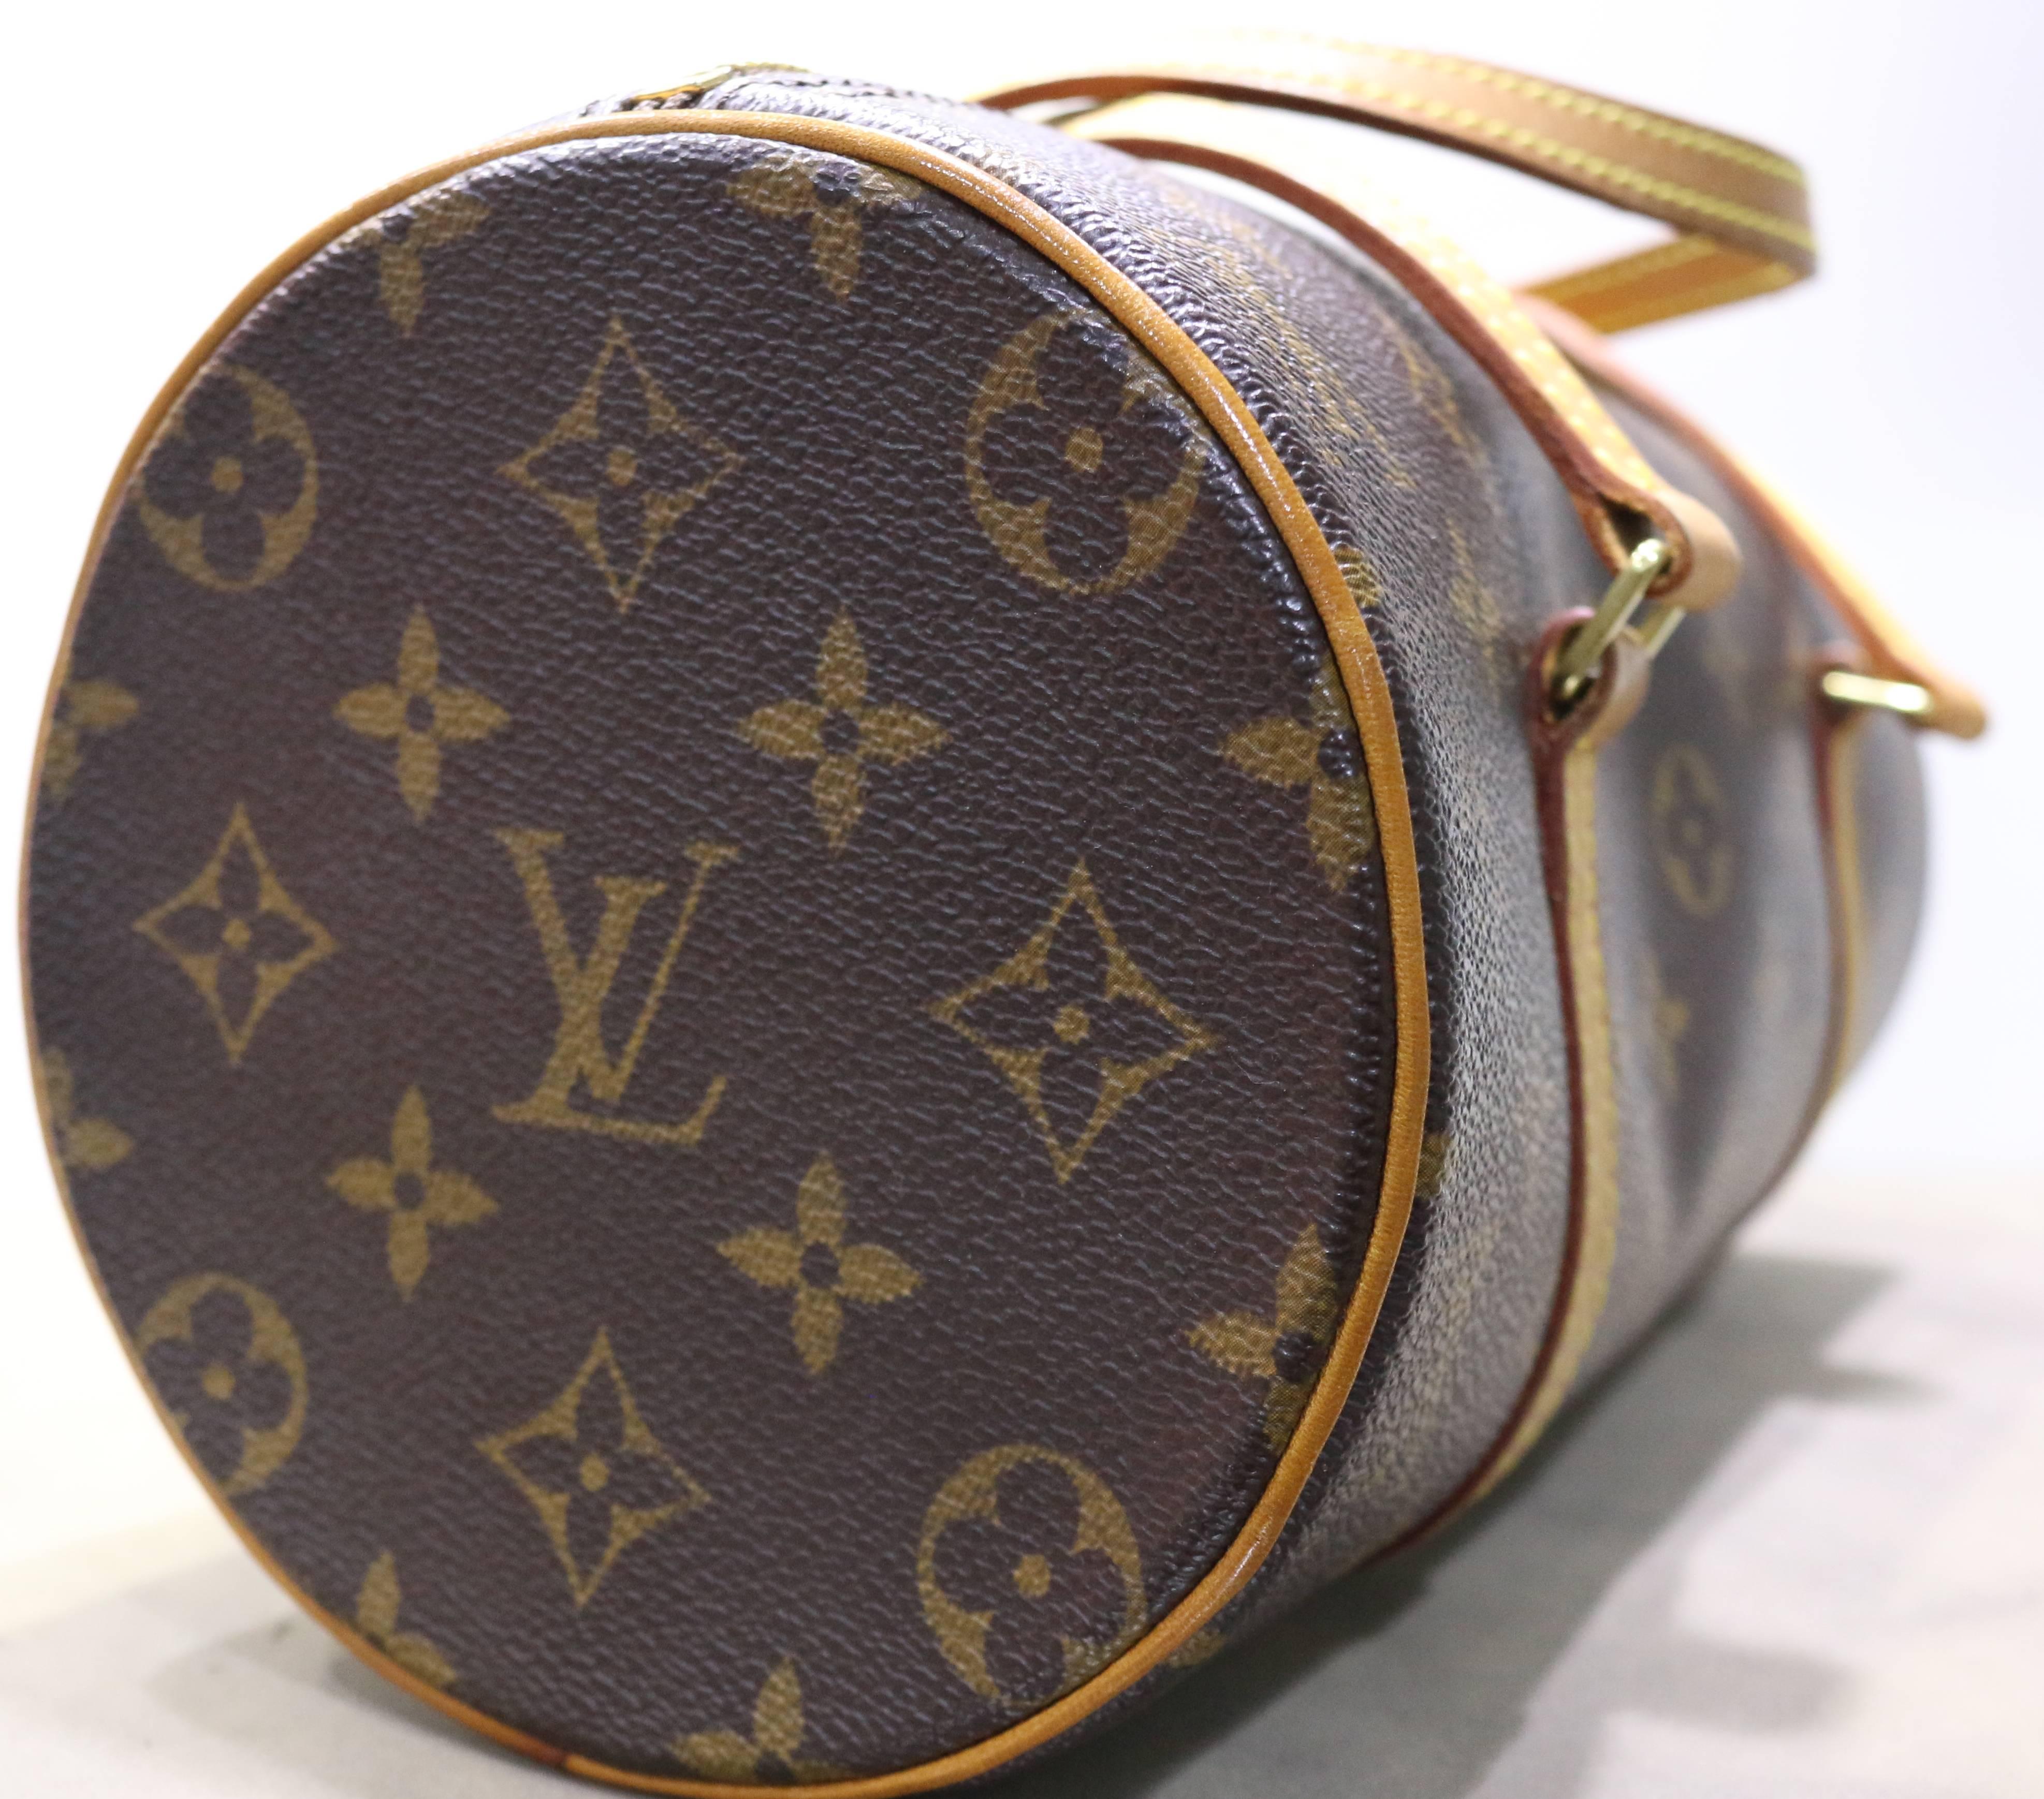 - This classic rounded shape with two straps monogram canvas is Louis Vuitton's trademark. It was originally designed by Henri Vuitton in 1966 and it has since become one of the popular bag among the collection.  The condition is excellent and it is